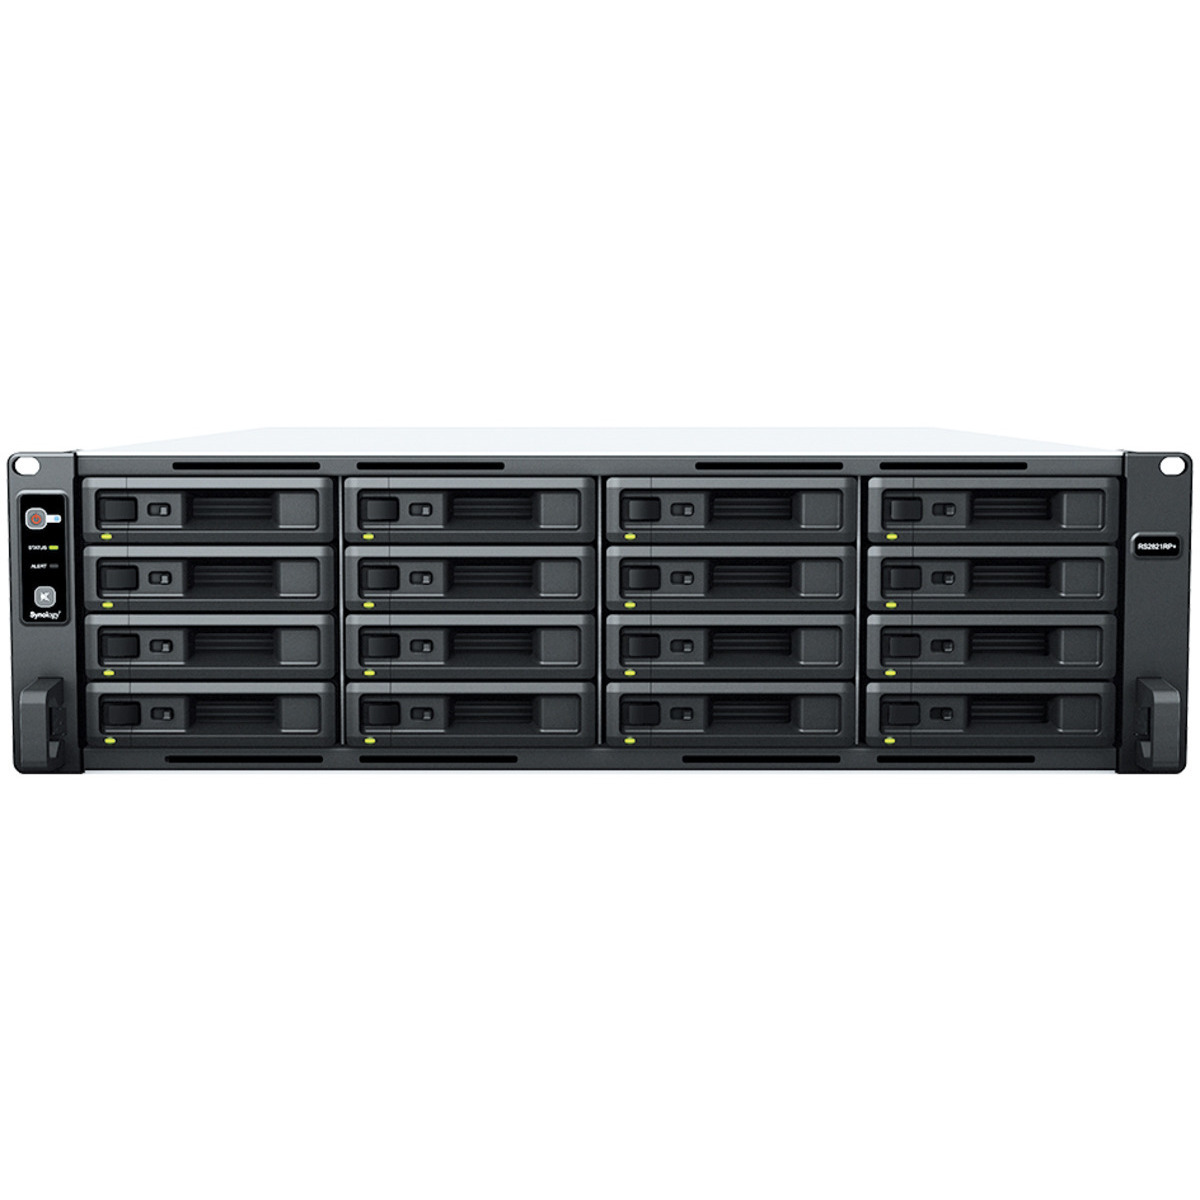 buy $7862 Synology RackStation RS2821RP+ 128tb RackMount NAS - Network Attached Storage Device 16x8000gb Toshiba Enterprise Capacity MG08ADA800E 3.5 7200rpm SATA 6Gb/s HDD ENTERPRISE Class Drives Installed - Burn-In Tested - ON SALE - nas headquarters buy network attached storage server device das new raid-5 free shipping usa christmas new year holiday sale RackStation RS2821RP+